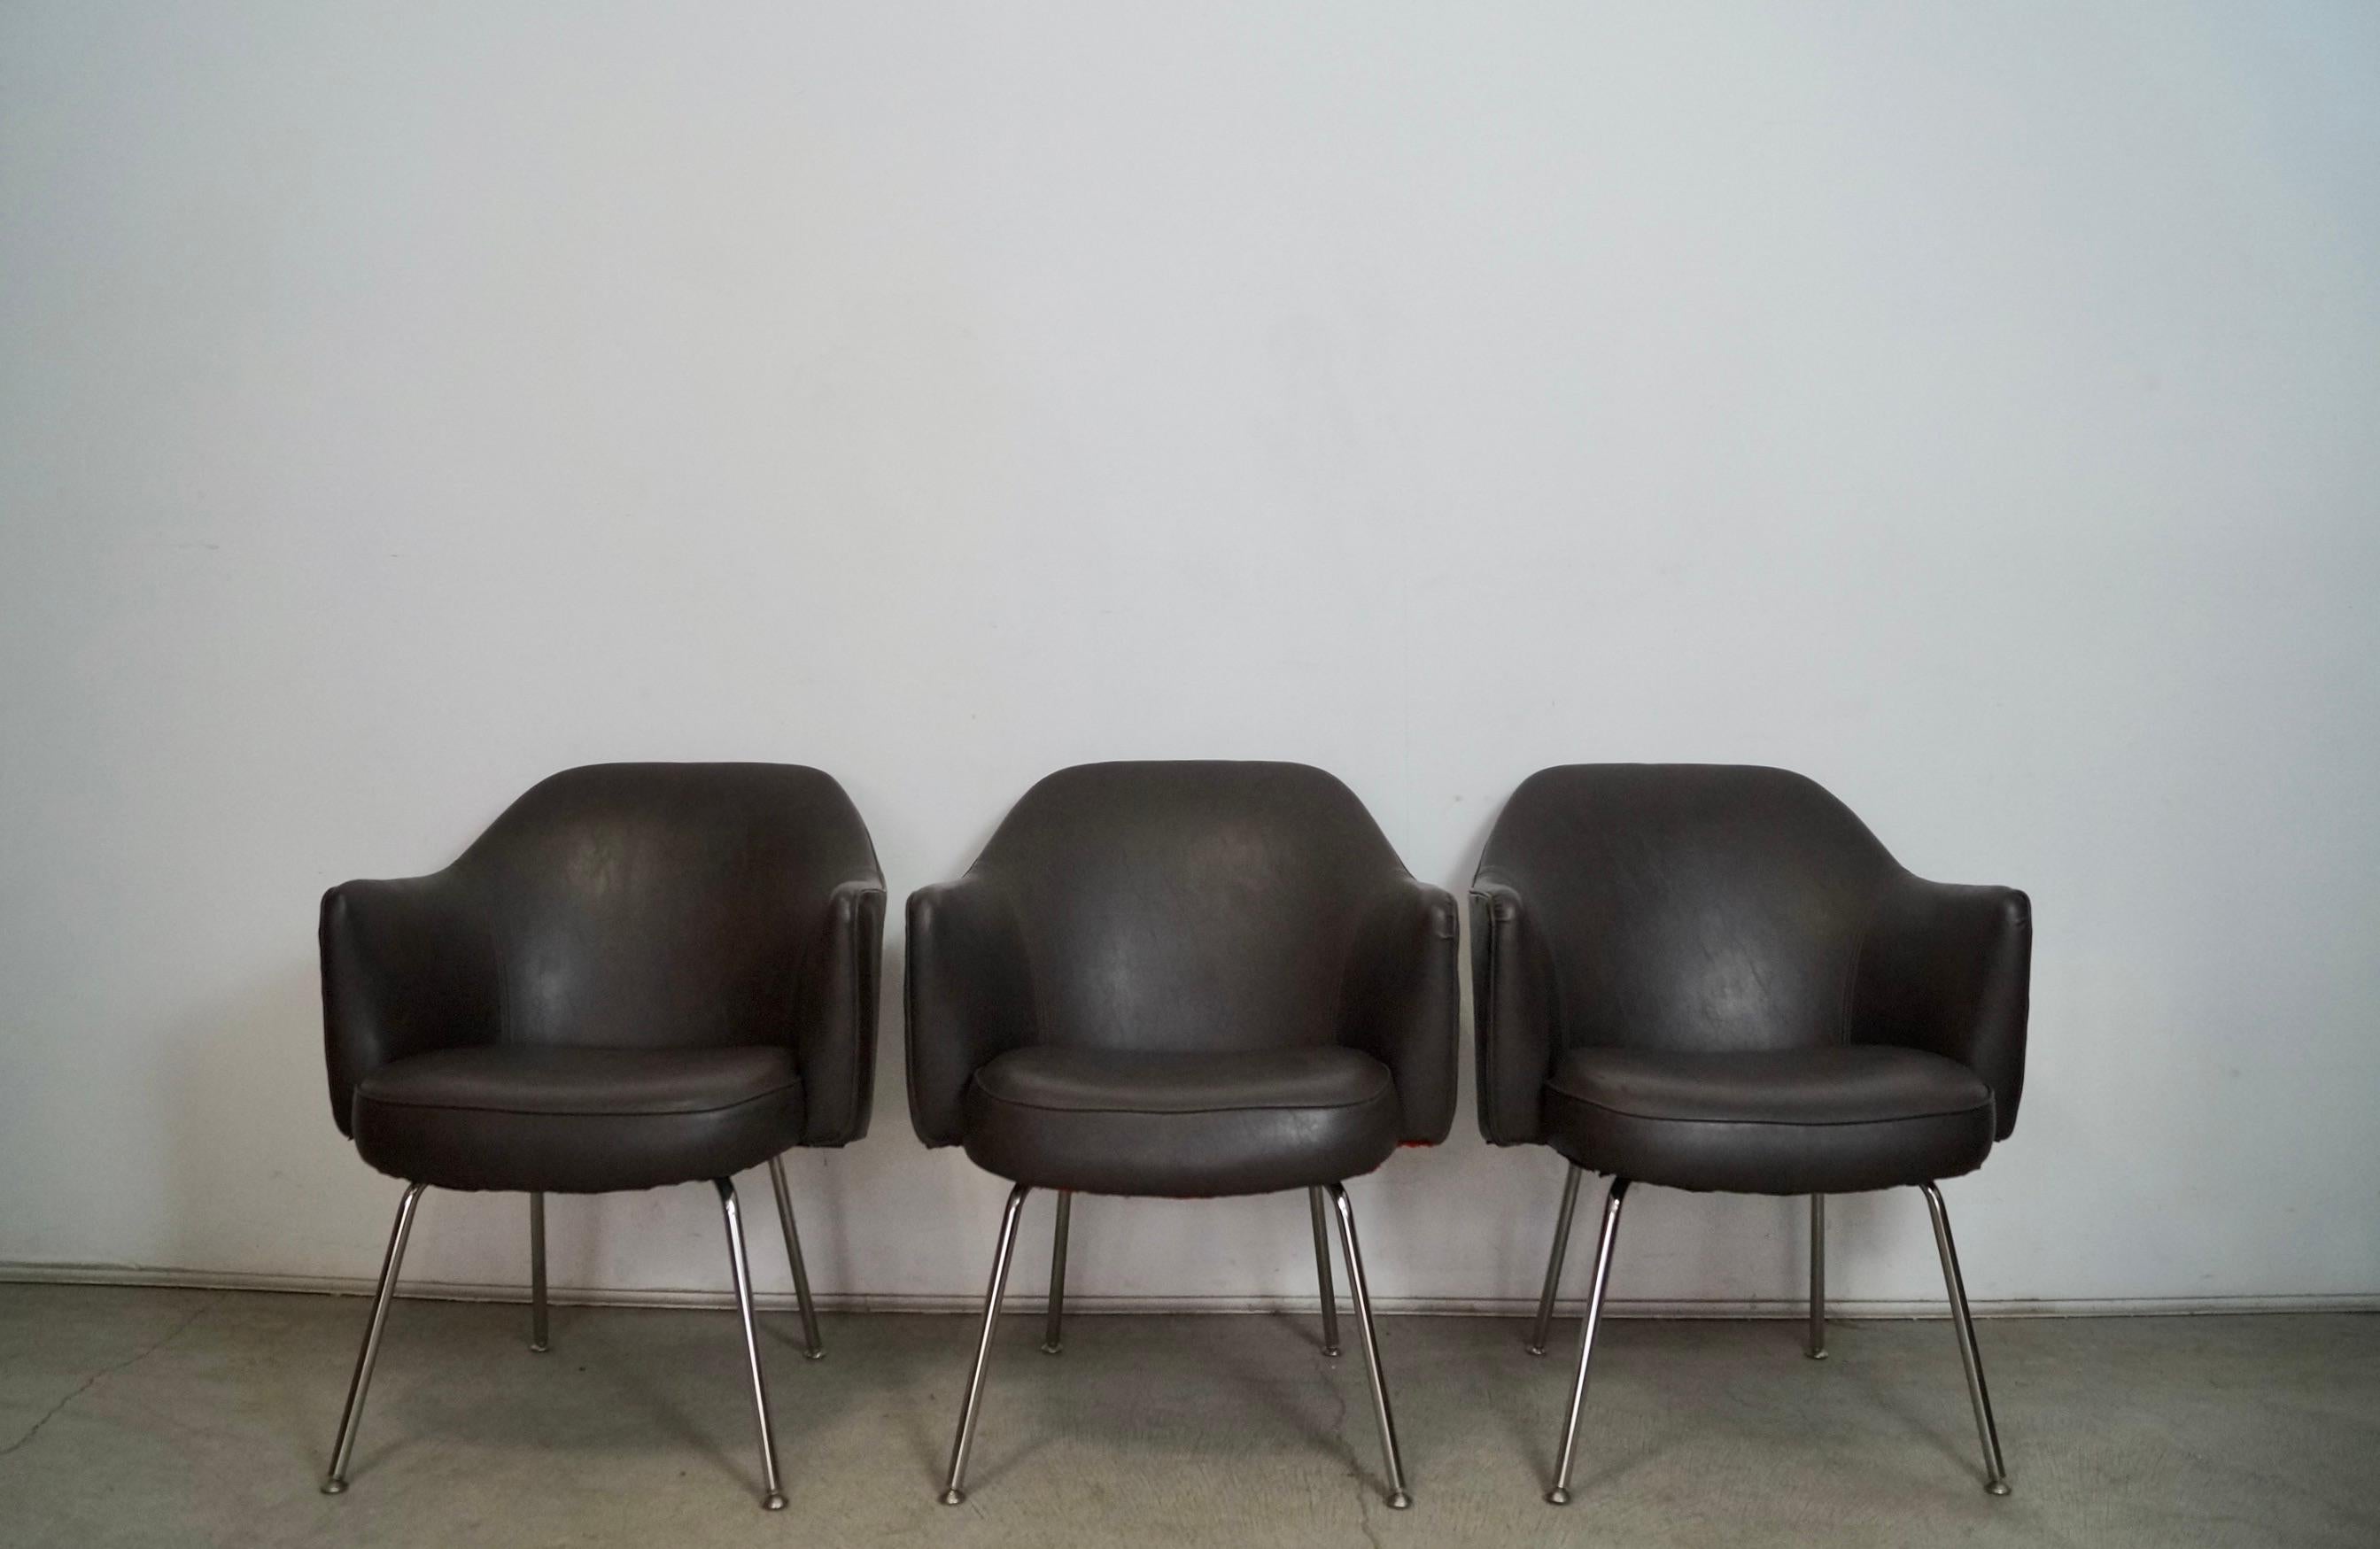 Incredible vintage Midcentury Modern executive armchairs for sale. Manufactured by Martin Brattrud, and made here in Los Angeles, California. They are modeled after Eero Saarinen for Knoll designs, and are really solid and well made. They have a